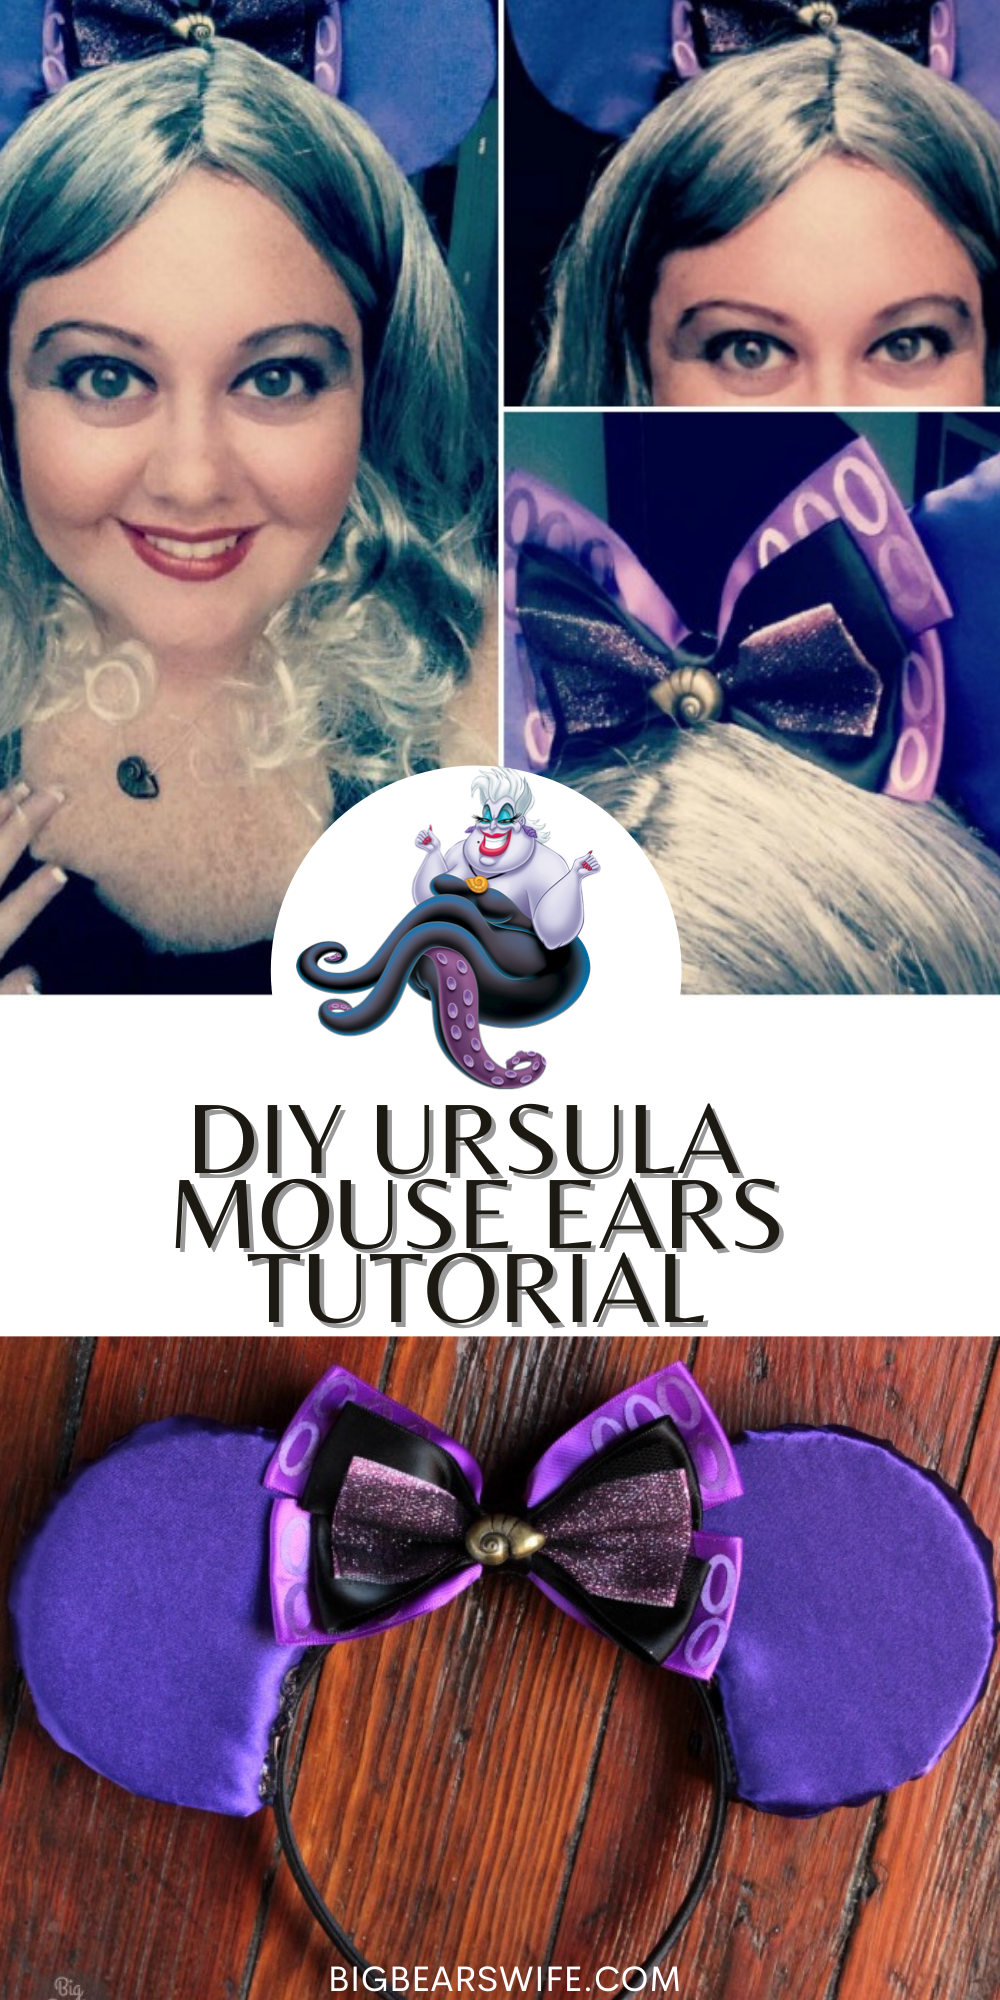  Want to make your very own Ursula Mouse Ears for your trip to Disney? I've got the step by step photo tutorial to show you how it's done! Don't want to make Ursula Mouse Ears? Just follow this tutorial and swap out the fabric and bows for any type of mouse ears! via @bigbearswife